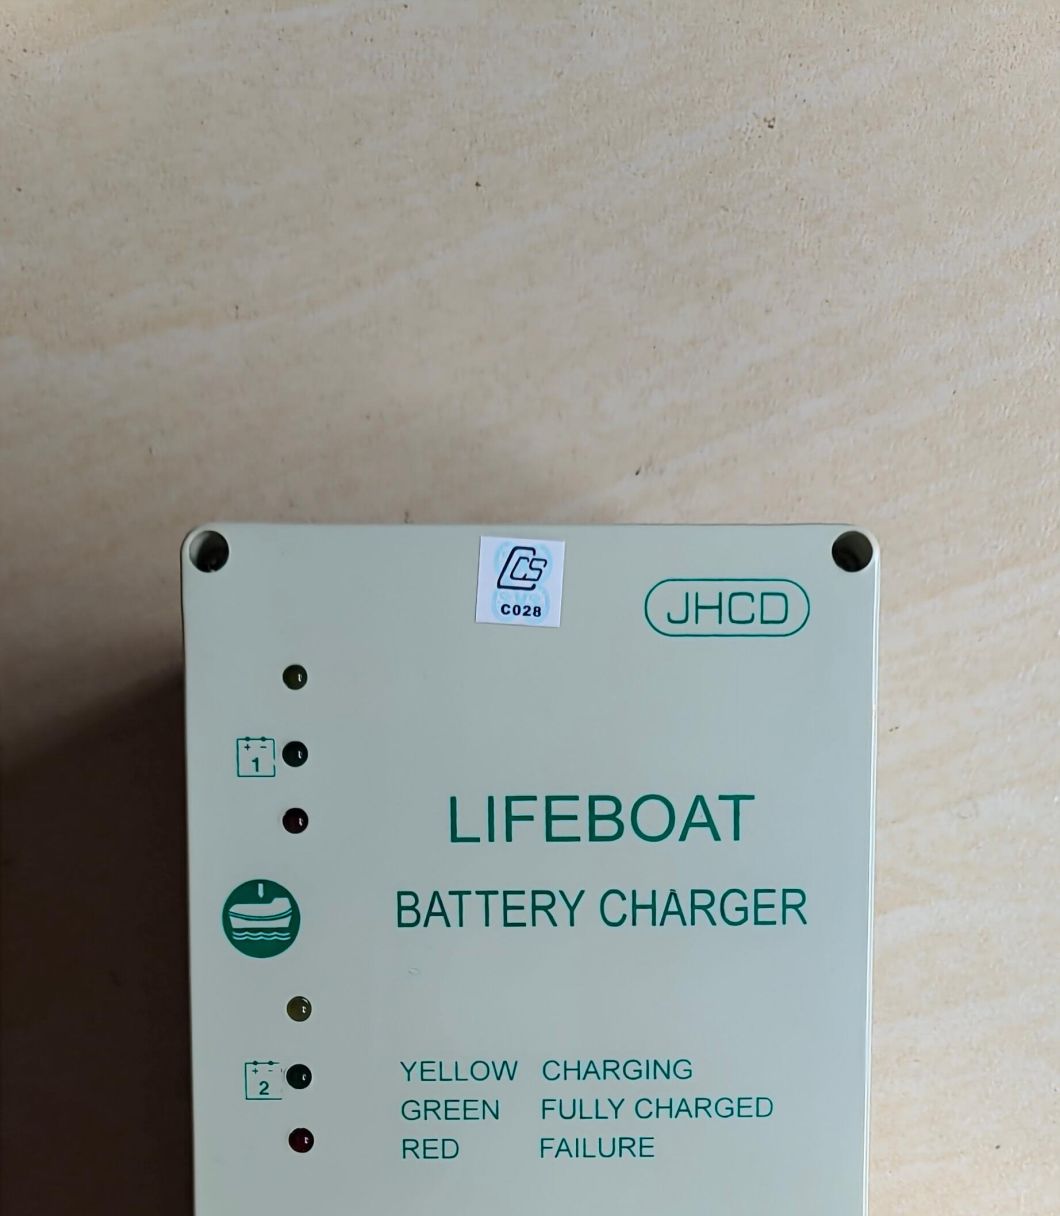 42V/AC 50/60Hz Lifeboat Battery Charger for Sale with High Quality